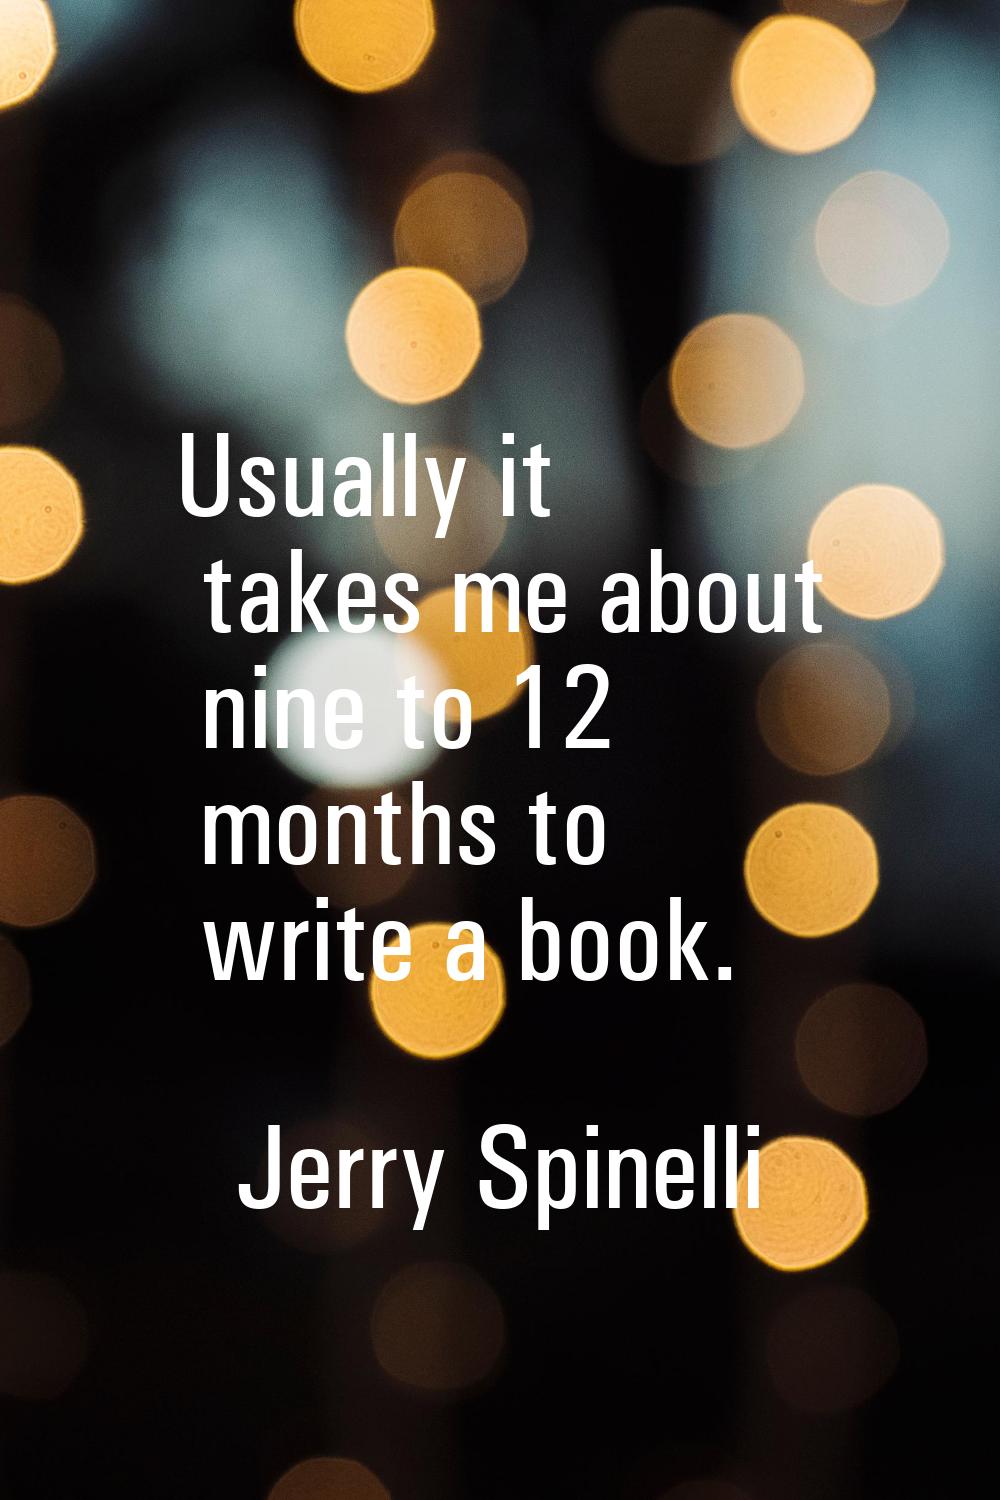 Usually it takes me about nine to 12 months to write a book.